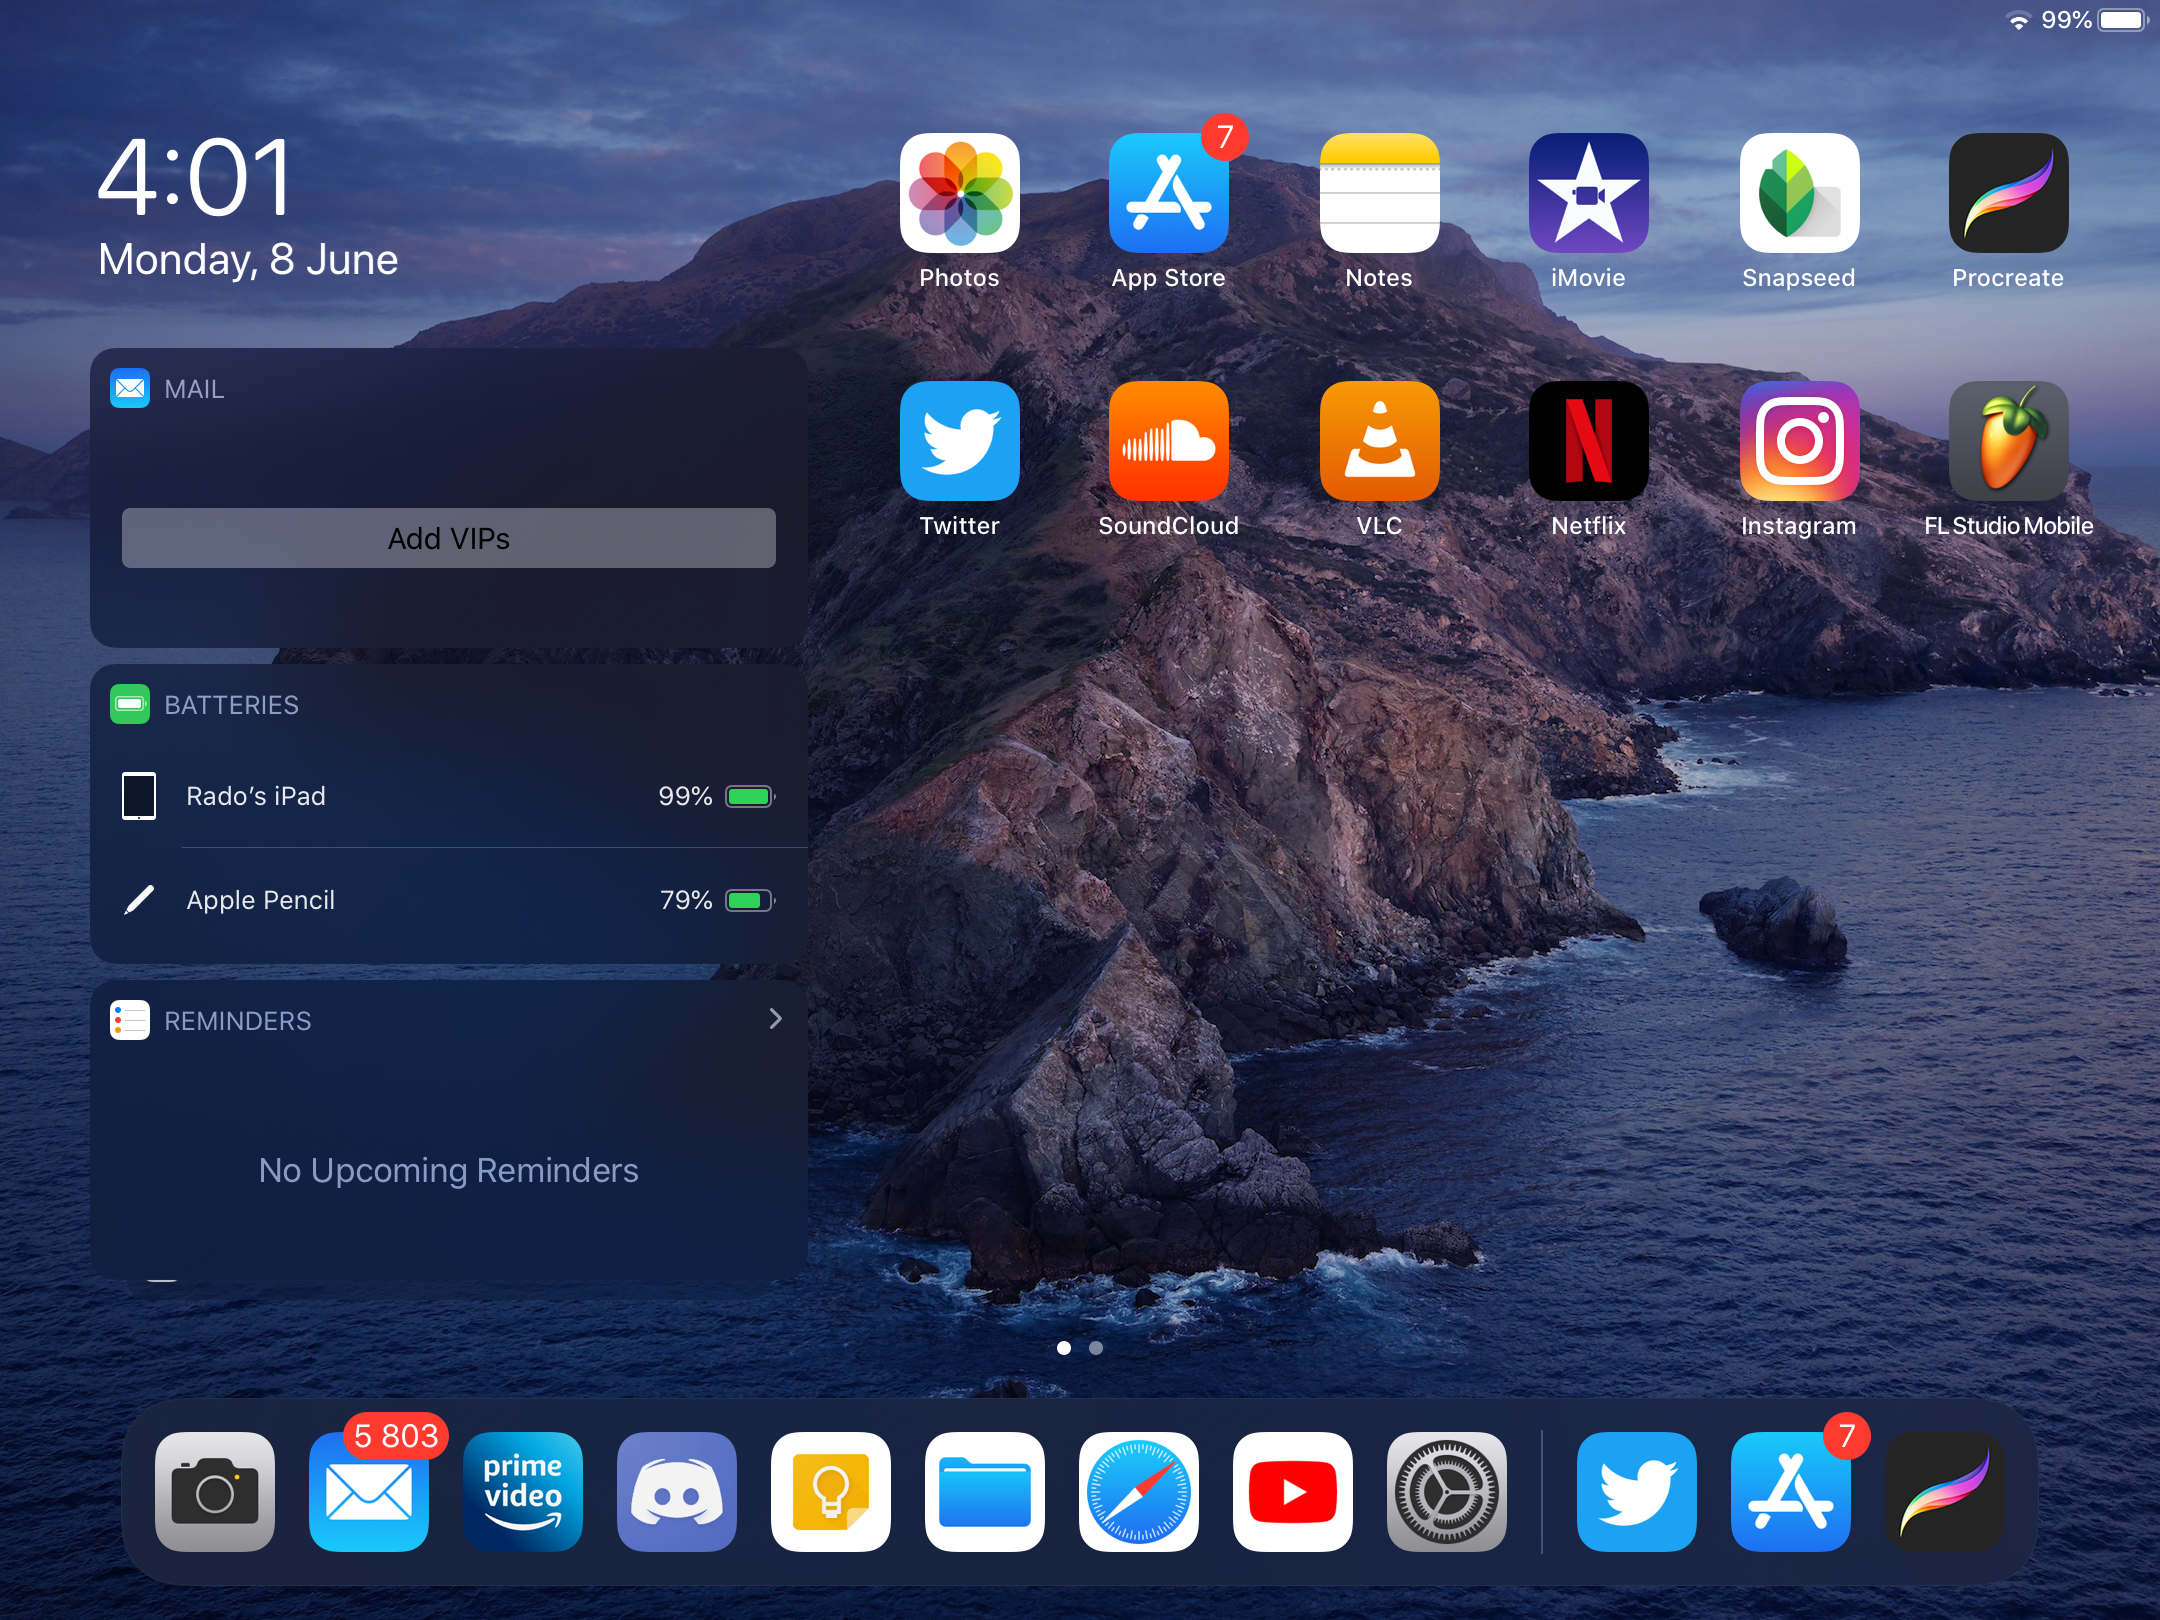 Today View is a home screen panel containing widgets, that is only available on iPad. - This is what iPadOS needs before the iPad can truly replace a computer